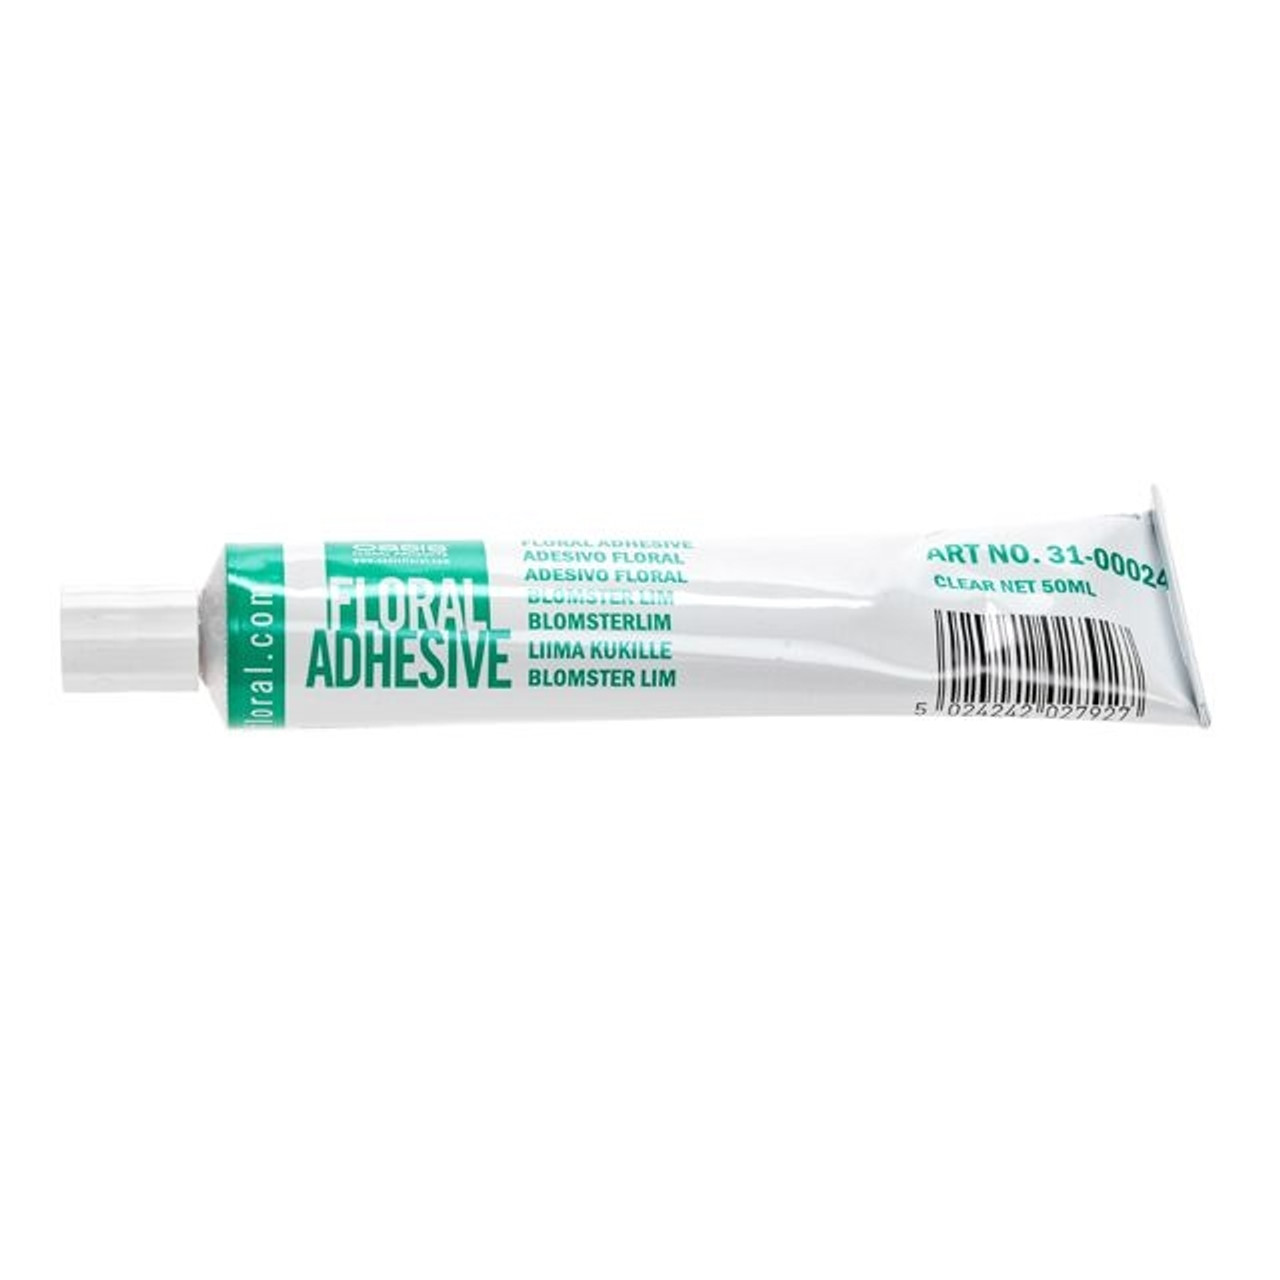 Oasis Tack 2000 Spray Glue - Floristry Products